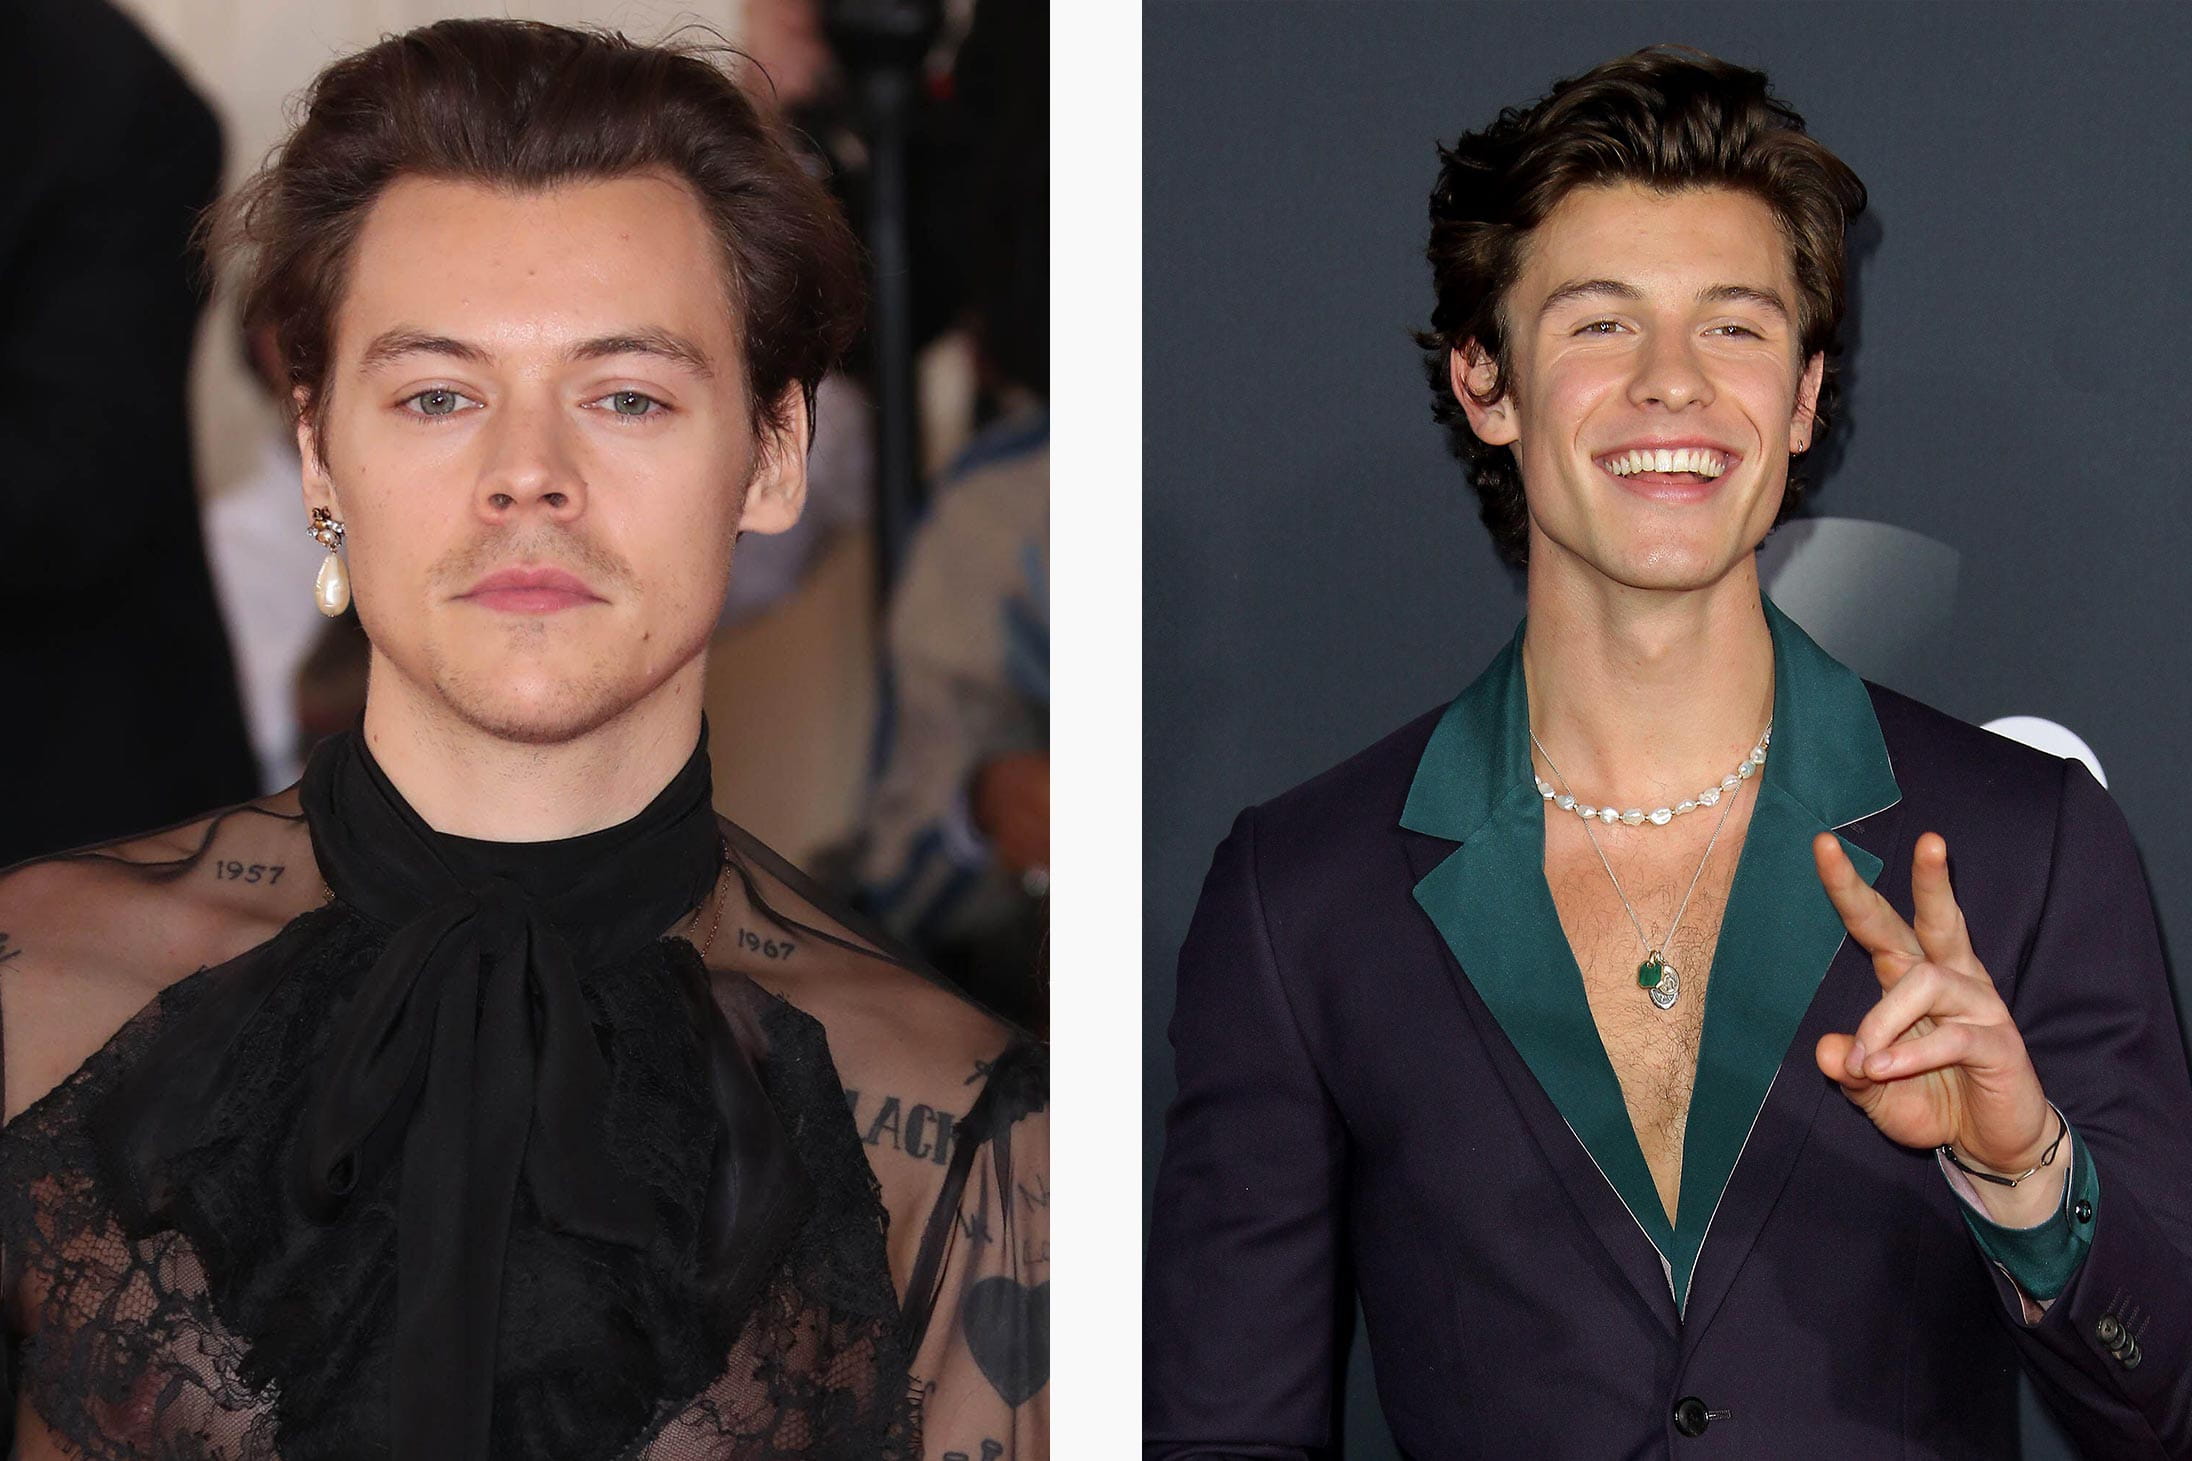 Harry Styles and Shawn Mendes wearing pearls